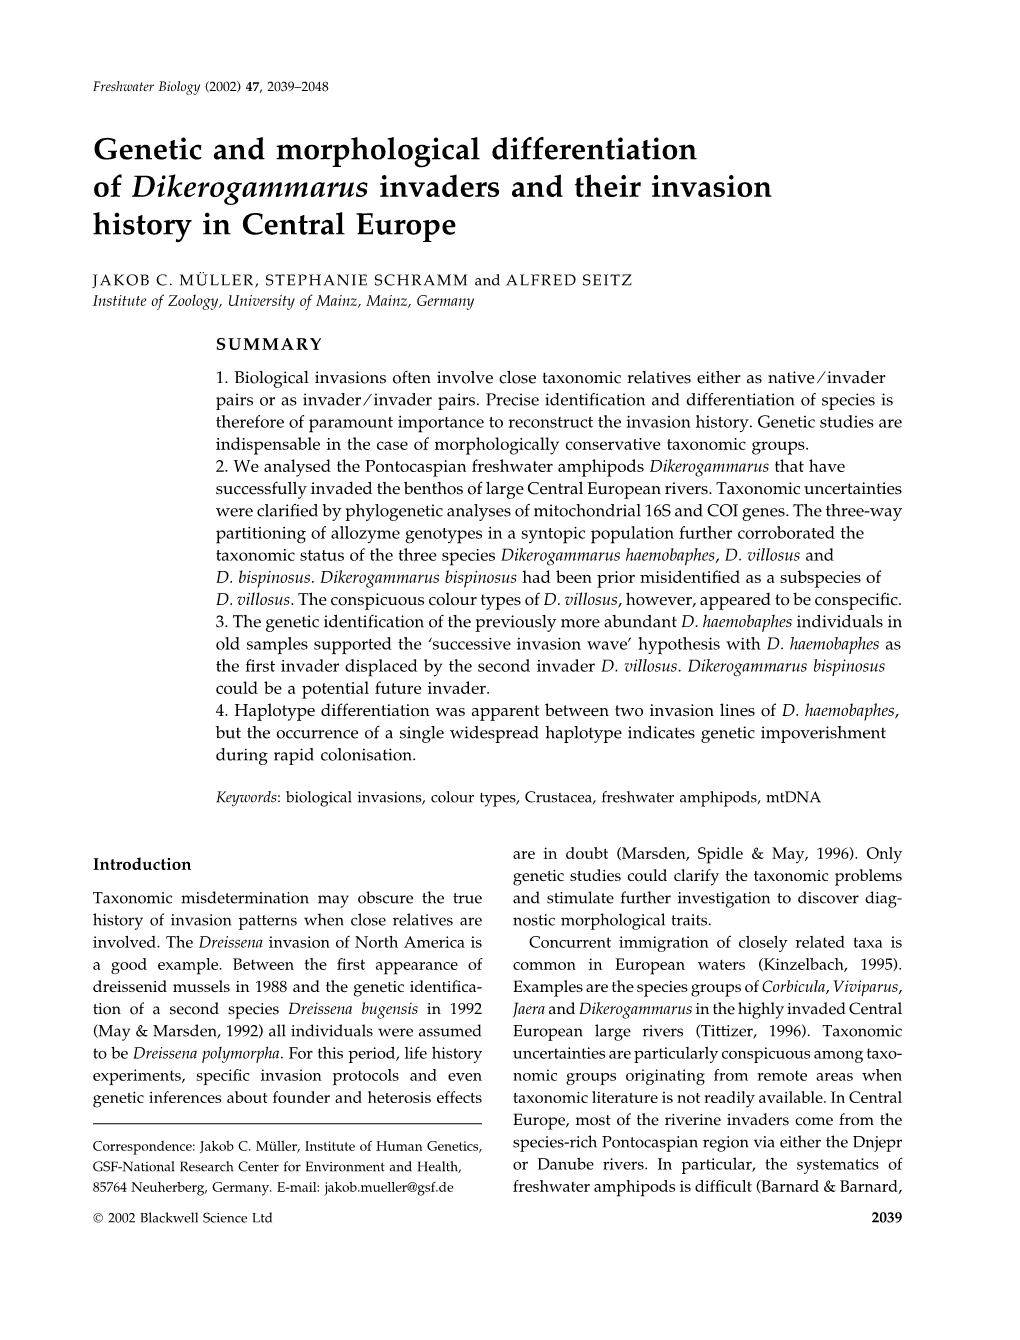 Genetic and Morphological Differentiation of Dikerogammarus Invaders and Their Invasion History in Central Europe